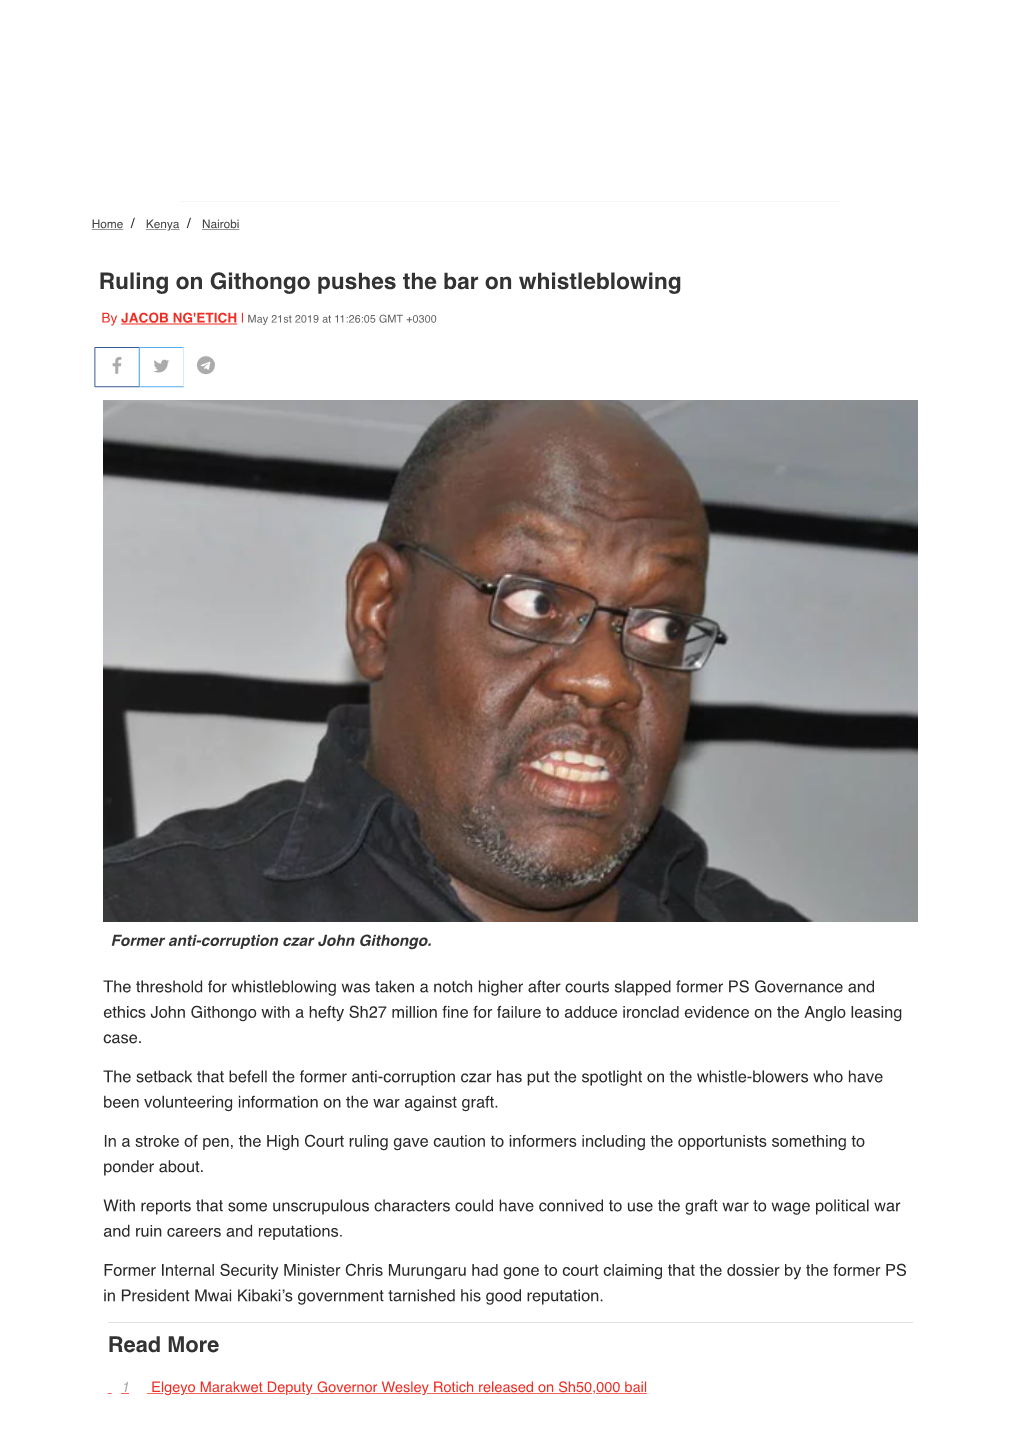 Ruling on Githongo Pushes the Bar on Whistleblowing